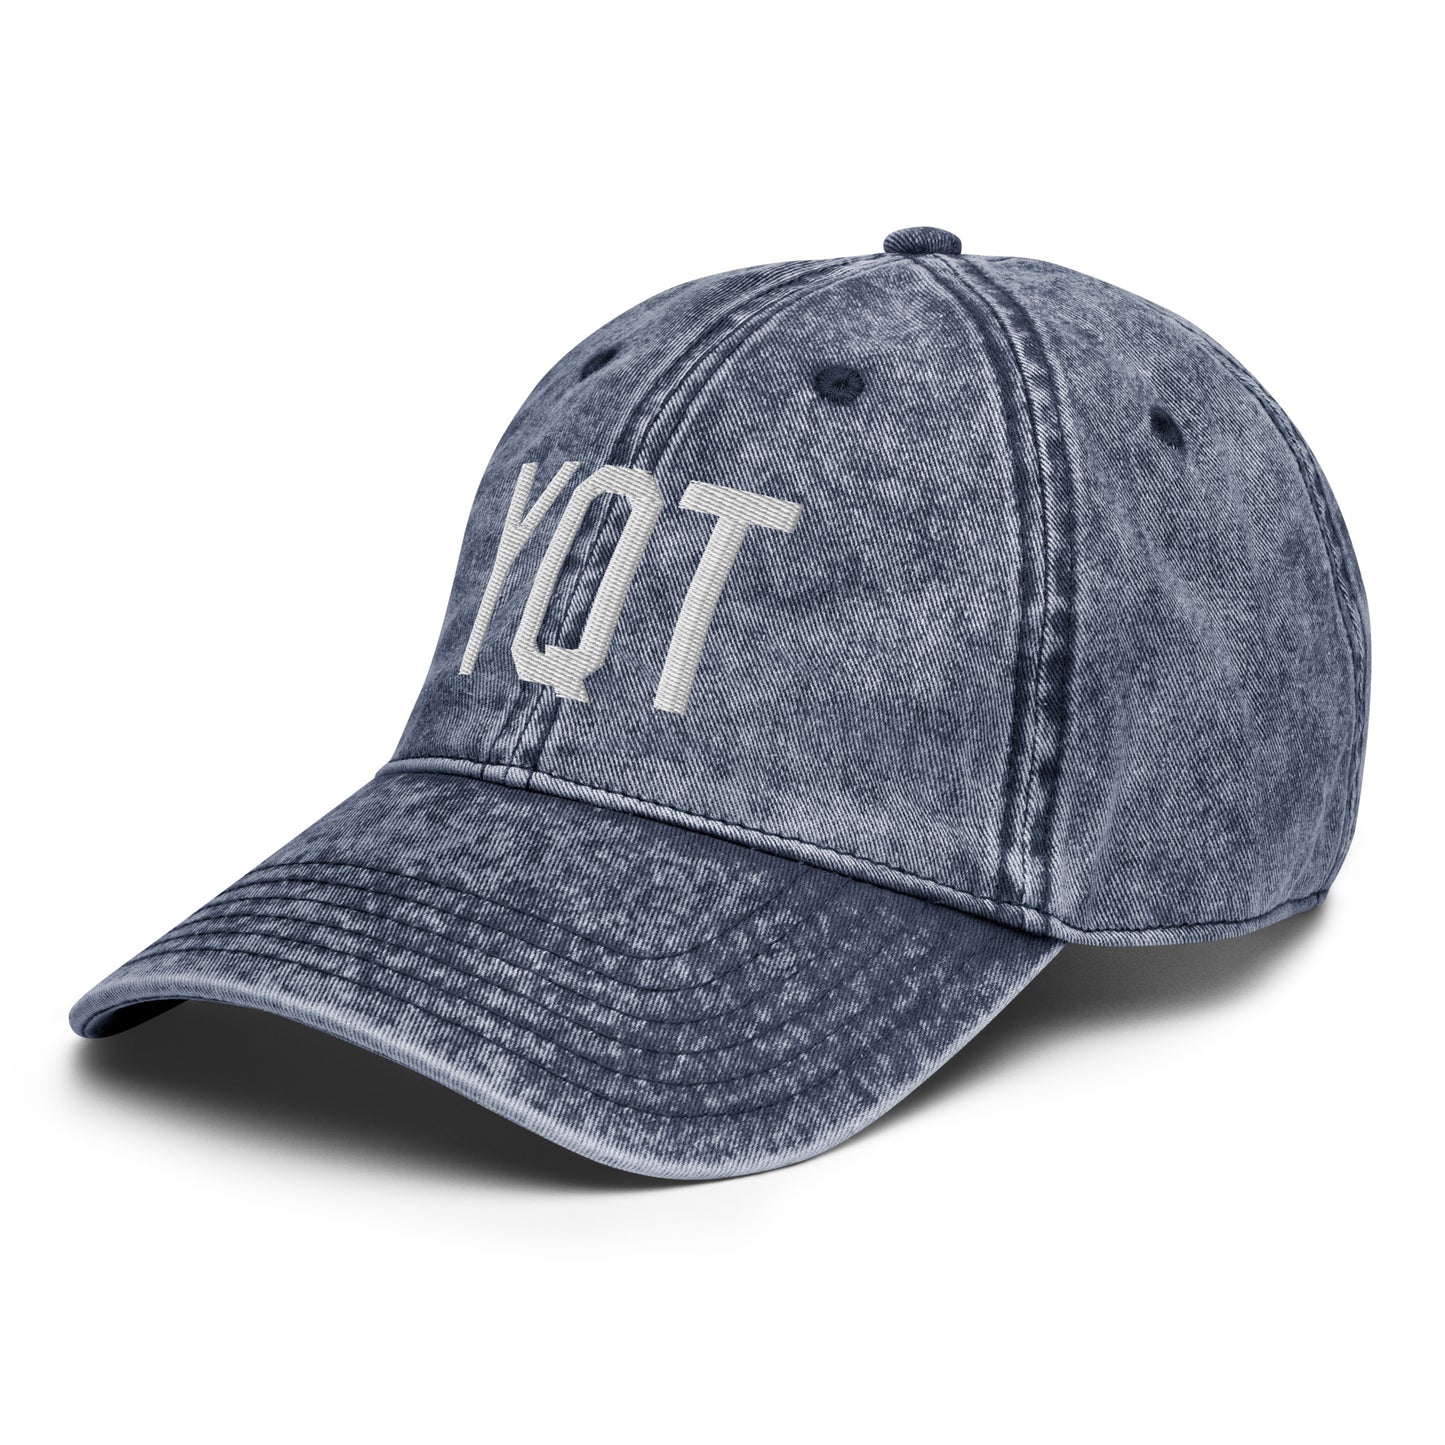 Airport Code Twill Cap - White • YQT Thunder Bay • YHM Designs - Image 17